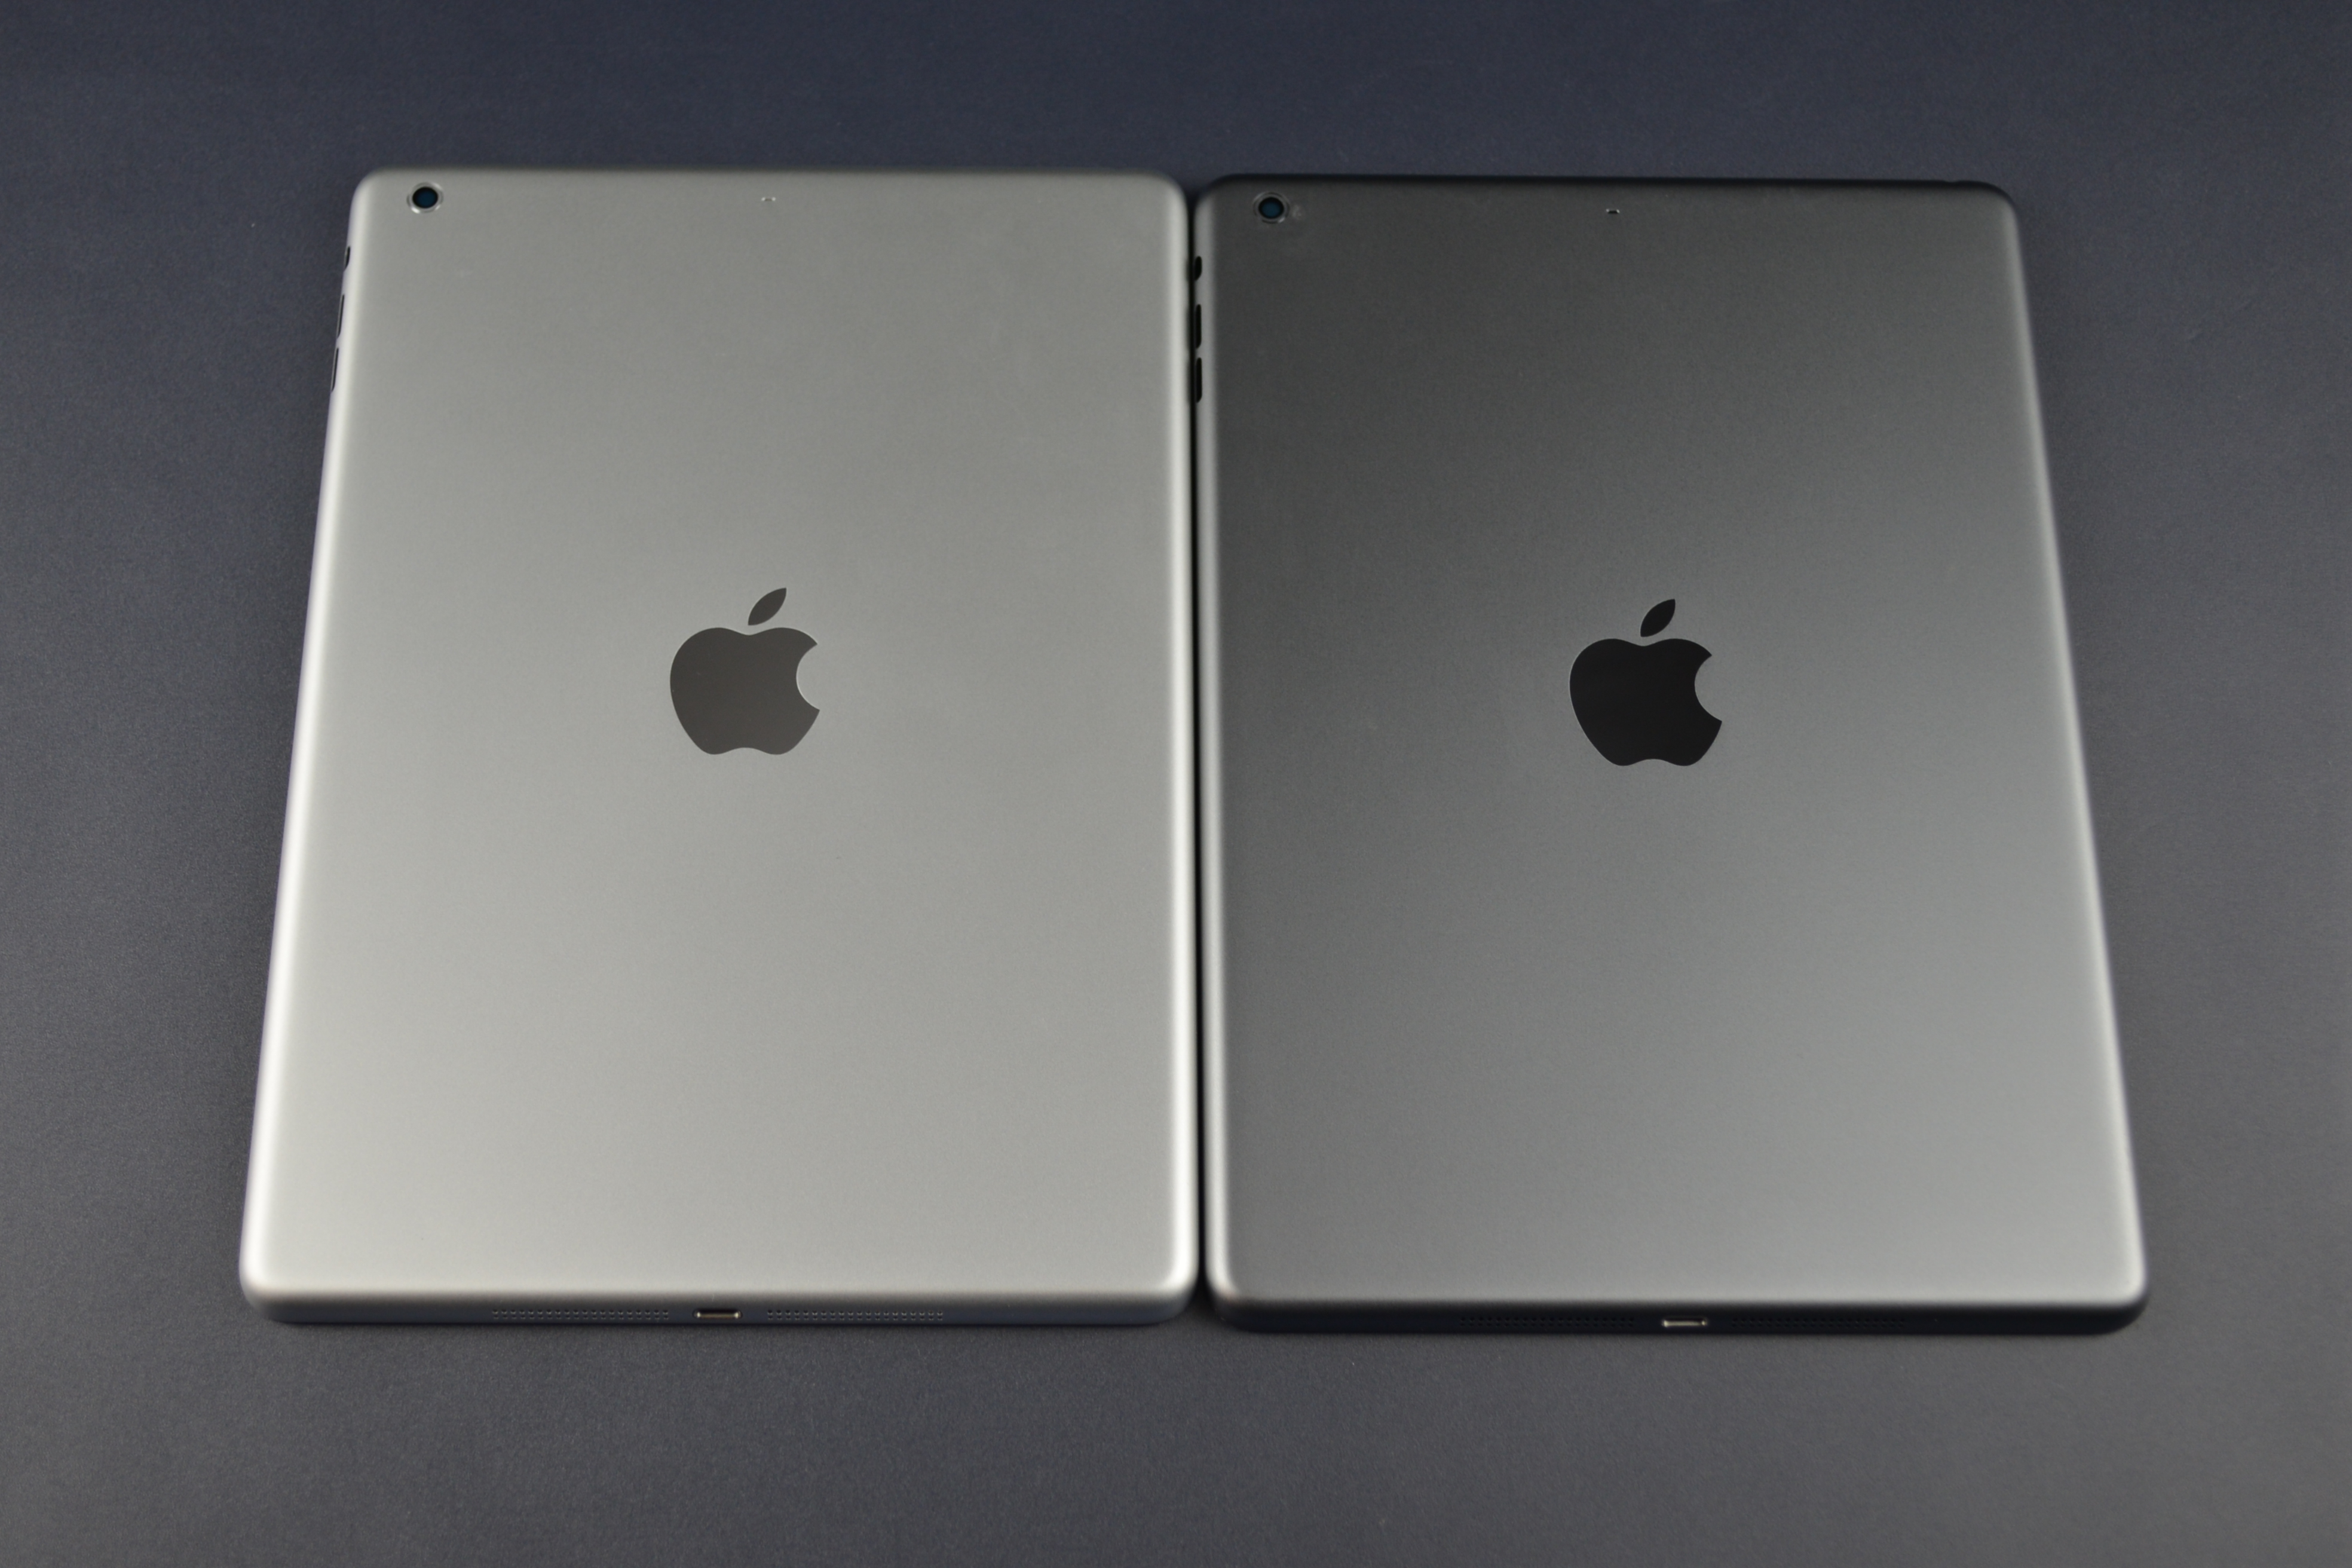 New report calls for iPad 6 with higher PPI, low-cost iMac and more in 2014